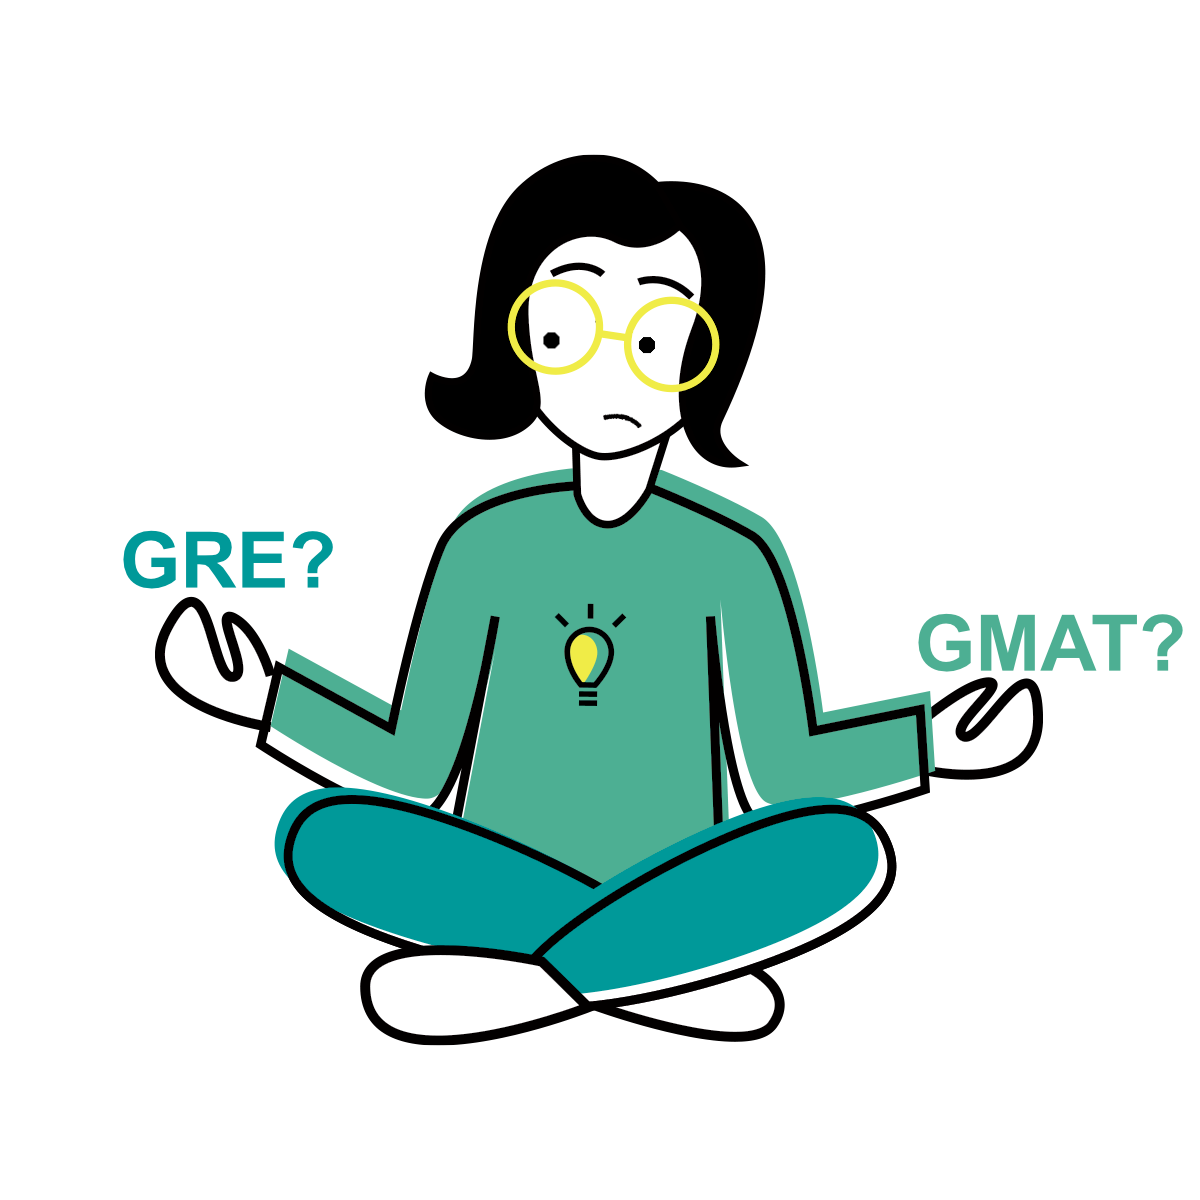 is the GMAT or GRE better for getting in to a masters in business program